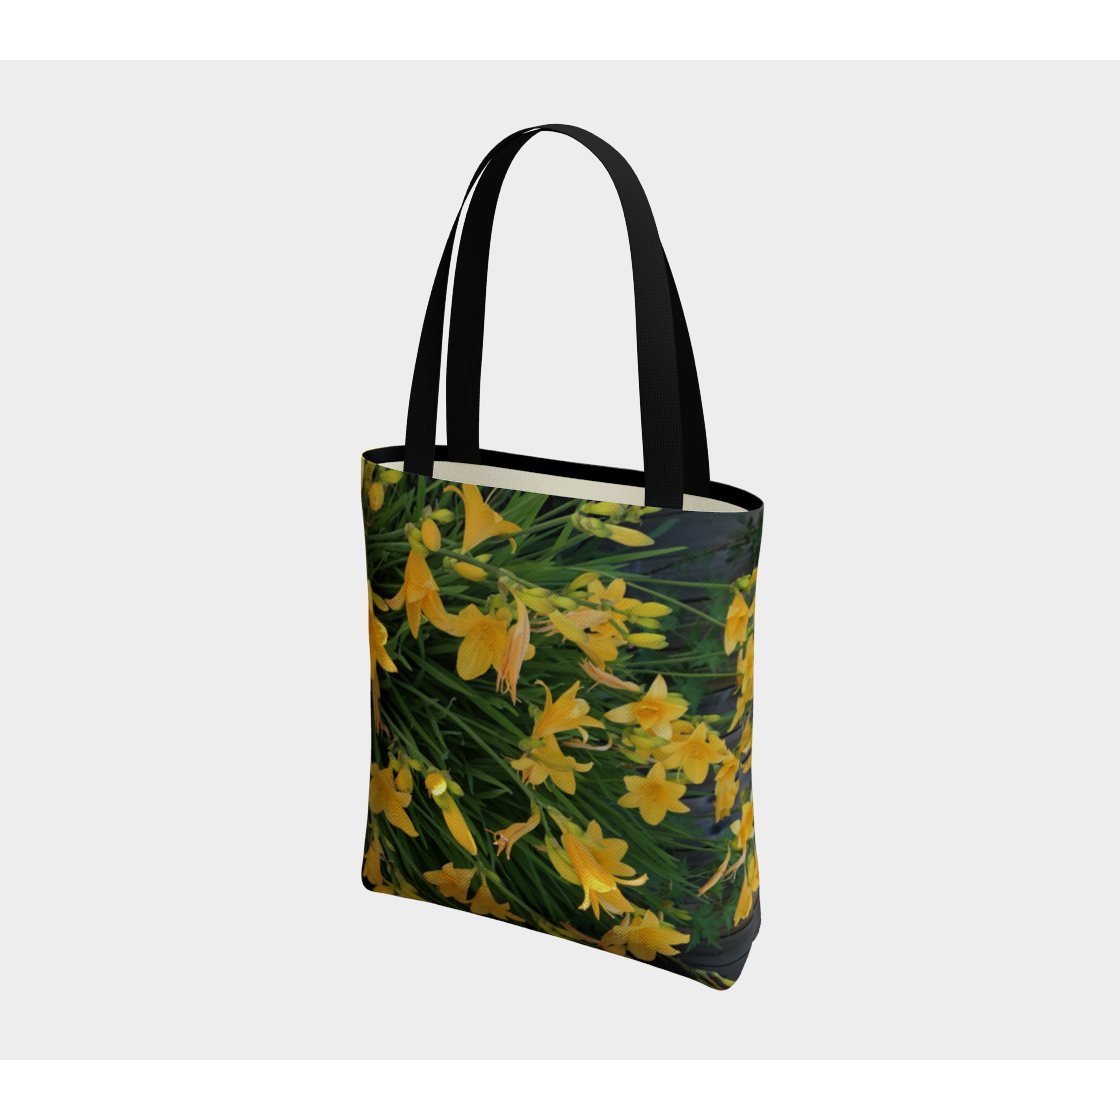 Tote Bag for Women with: Yellow Lily Design, Light Inside